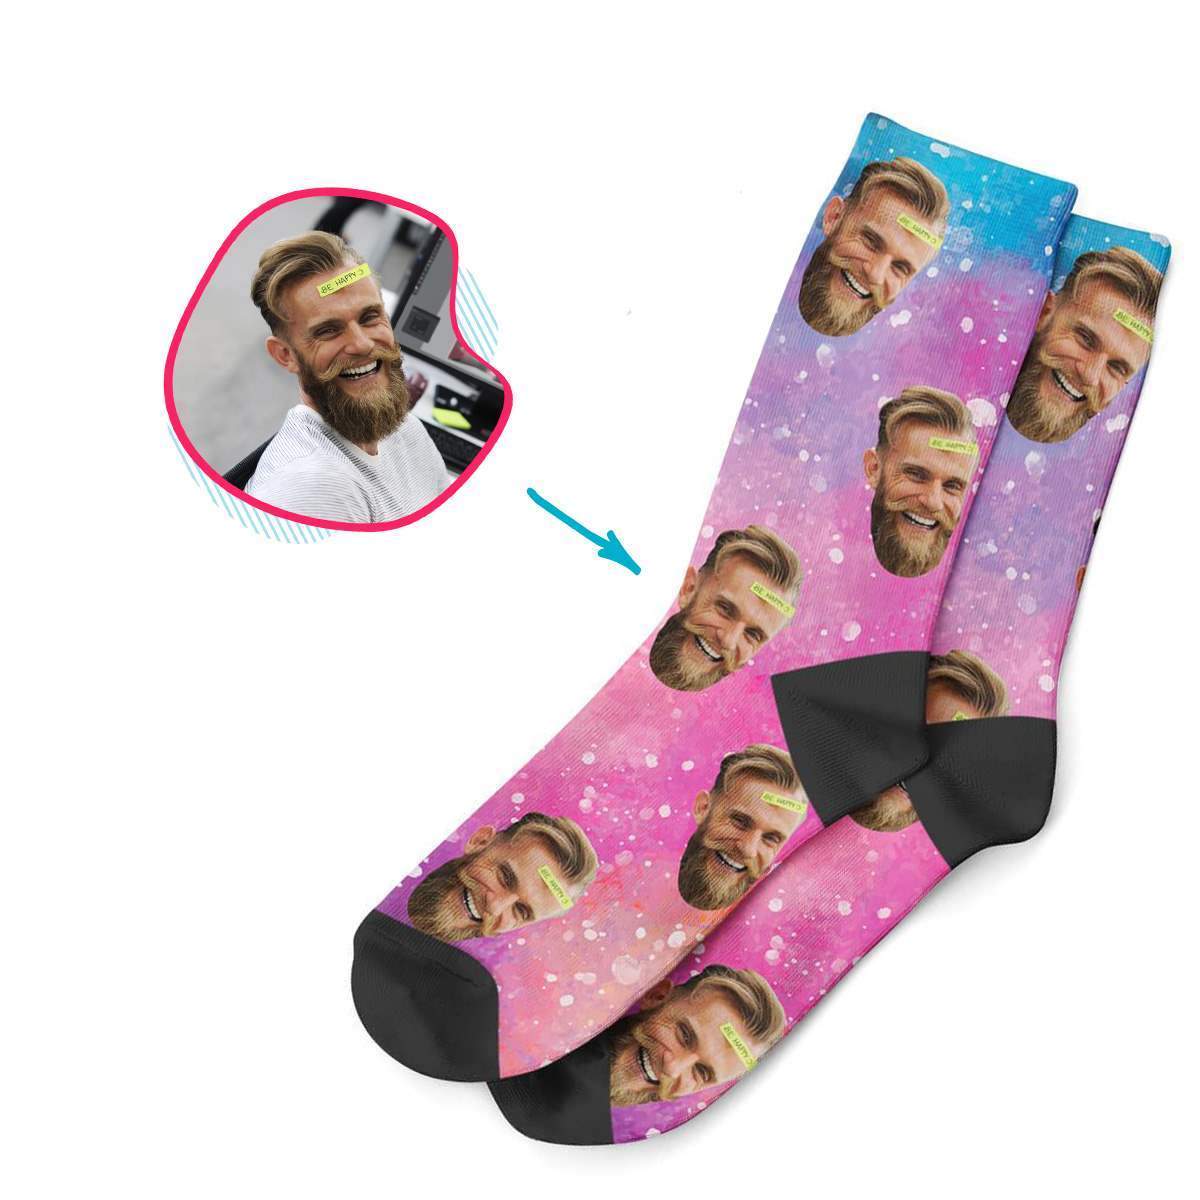 galaxy Galaxy socks personalized with photo of face printed on them